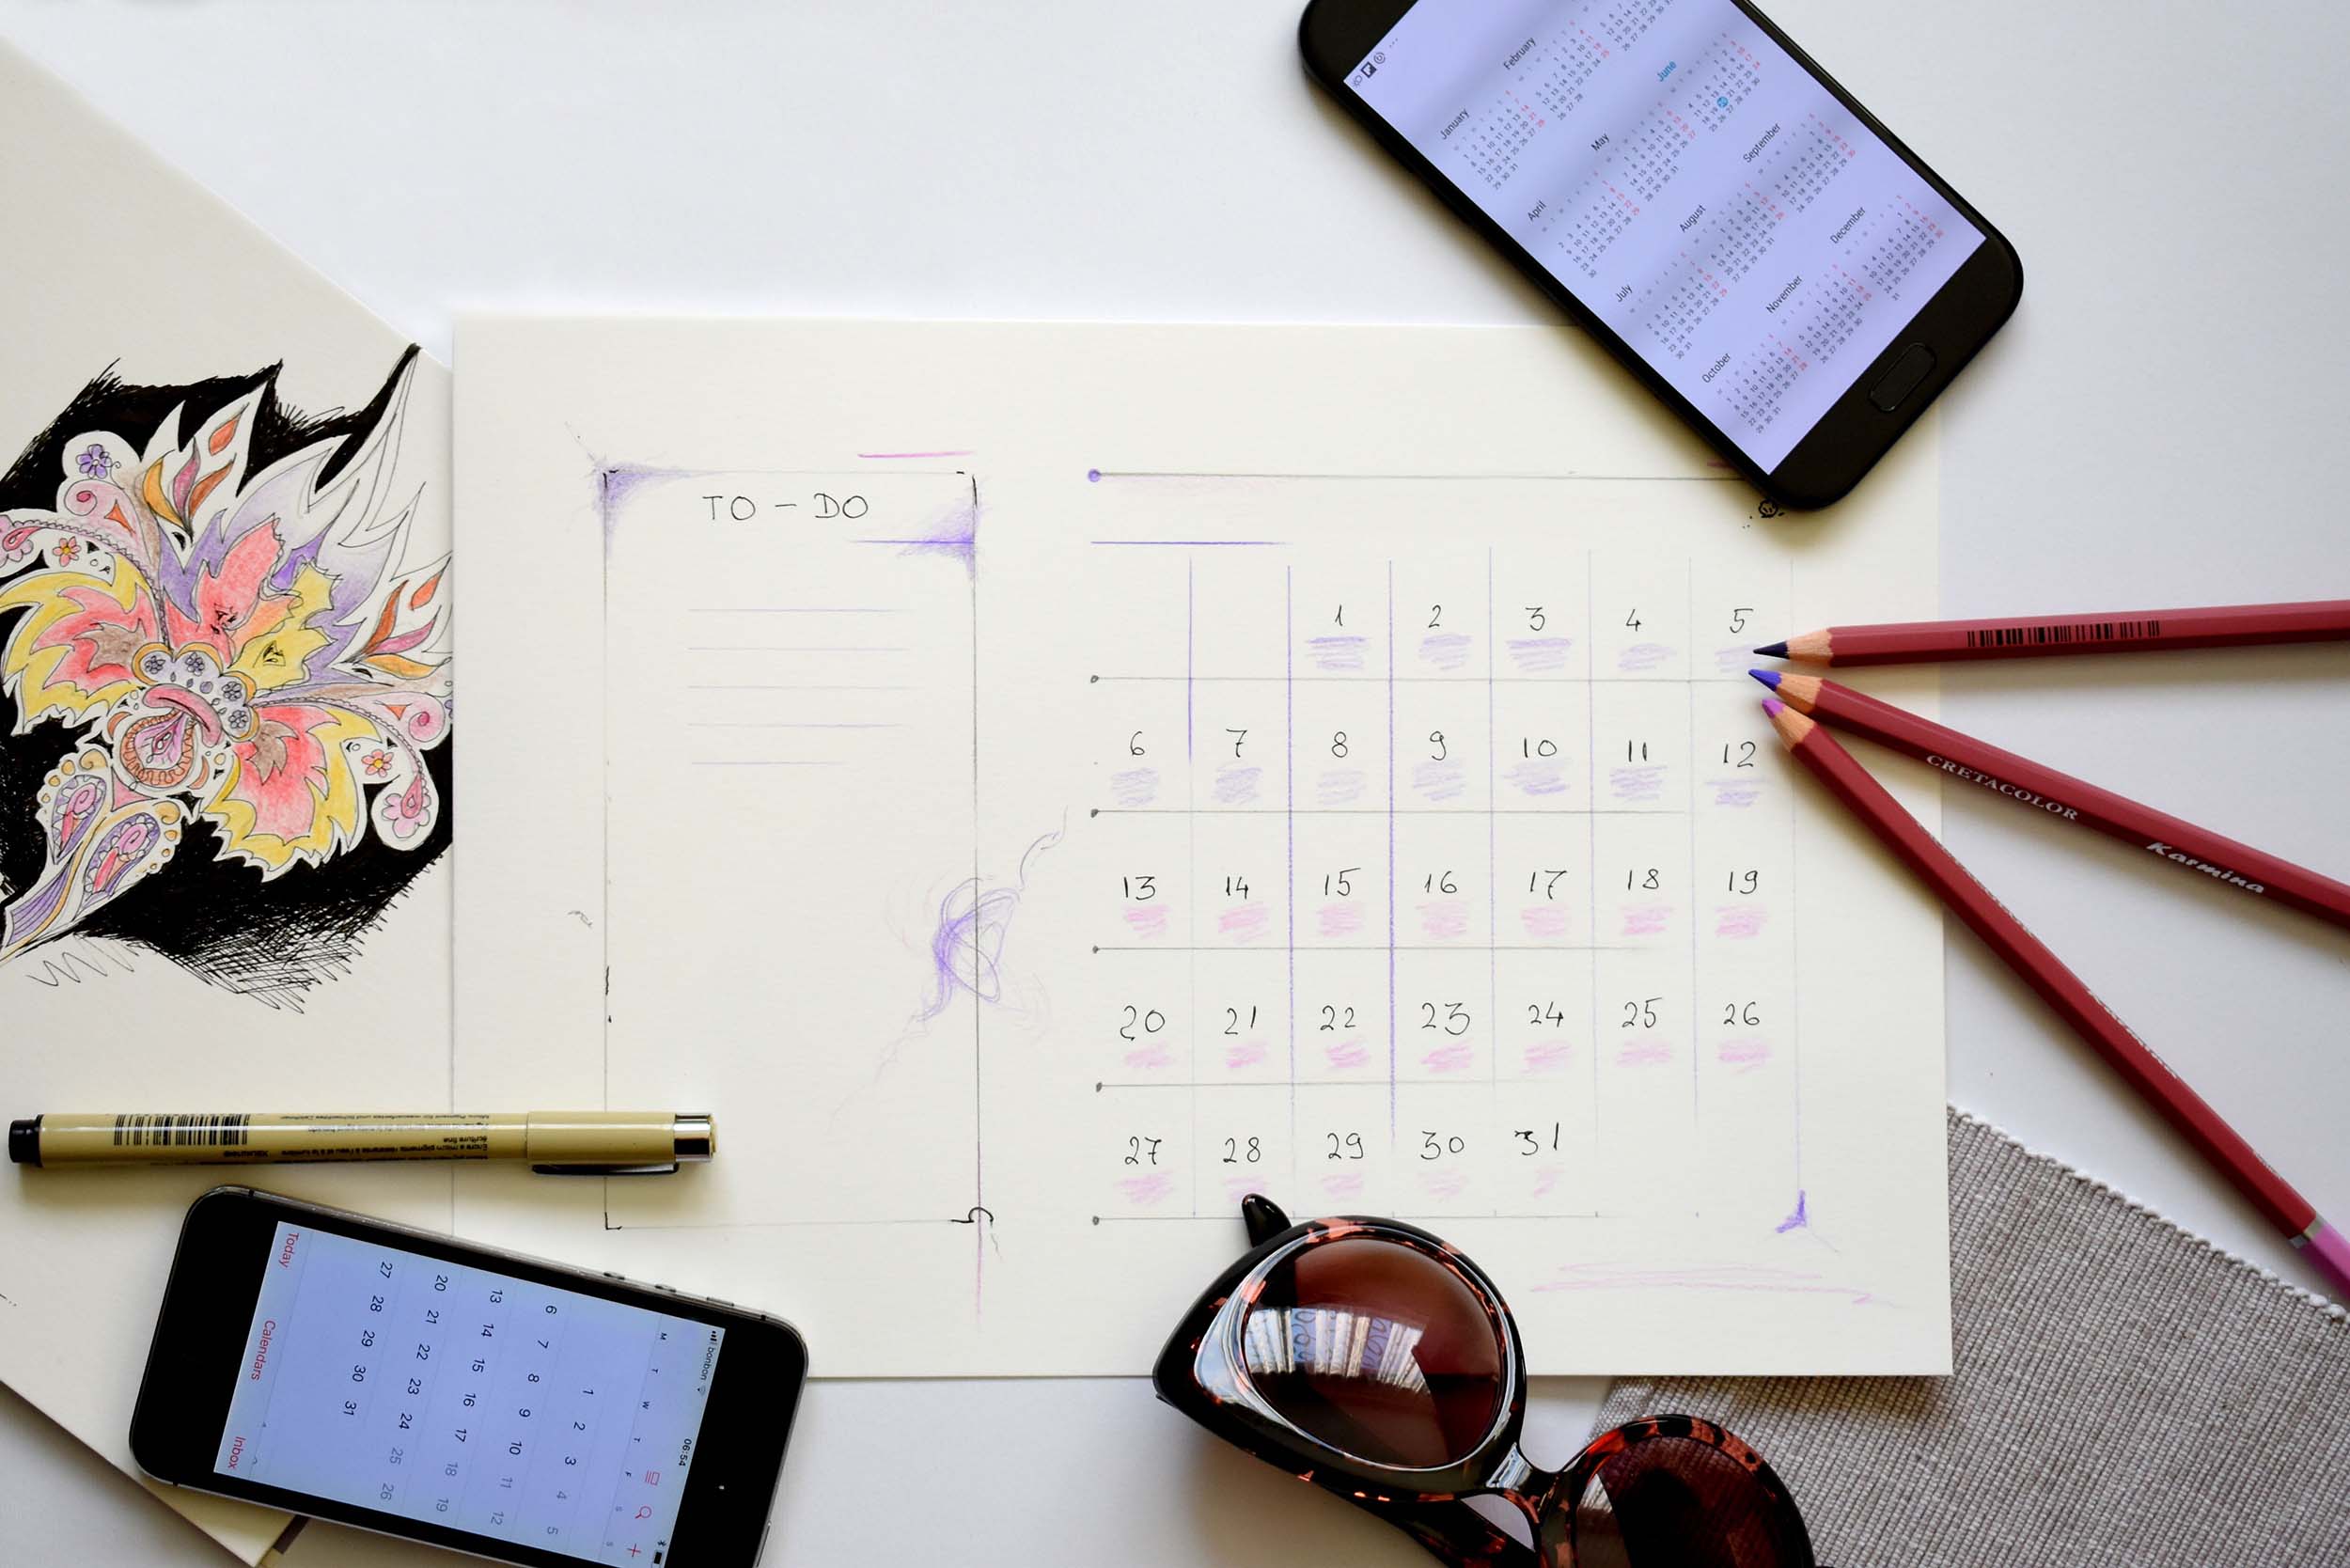 Calendar, pencils, and phones laid out on a desk